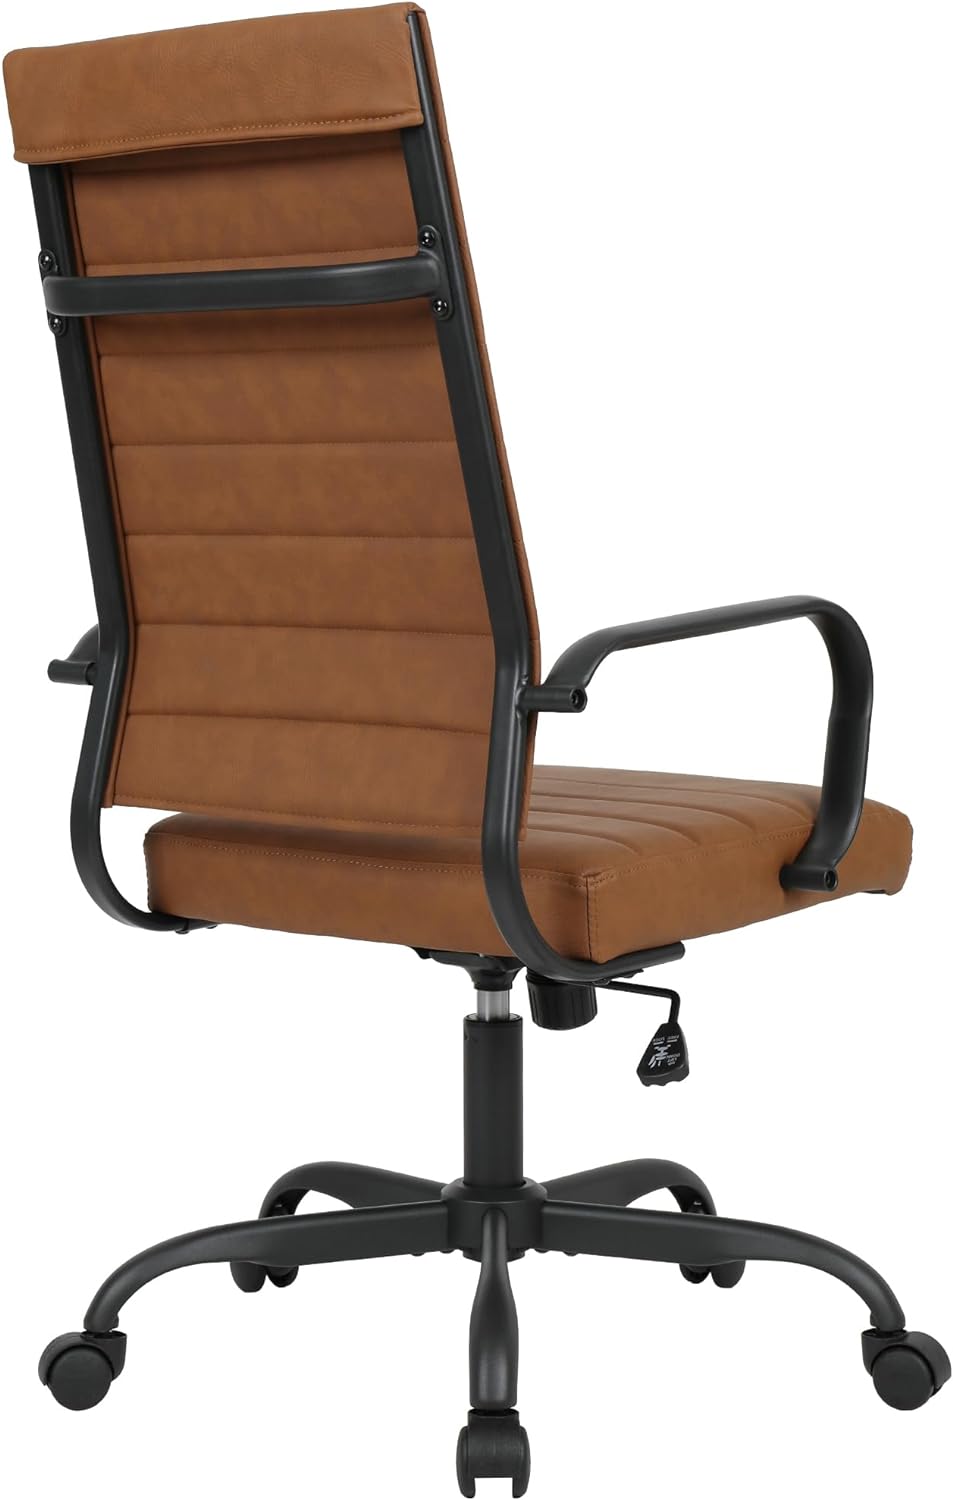 LANDSUN Home Office Chair High Back Executive Chair Ribbed Leather Computer Desk Chair with Armrests Soft Pad Adjustable Height Swivel Conference Brown Black